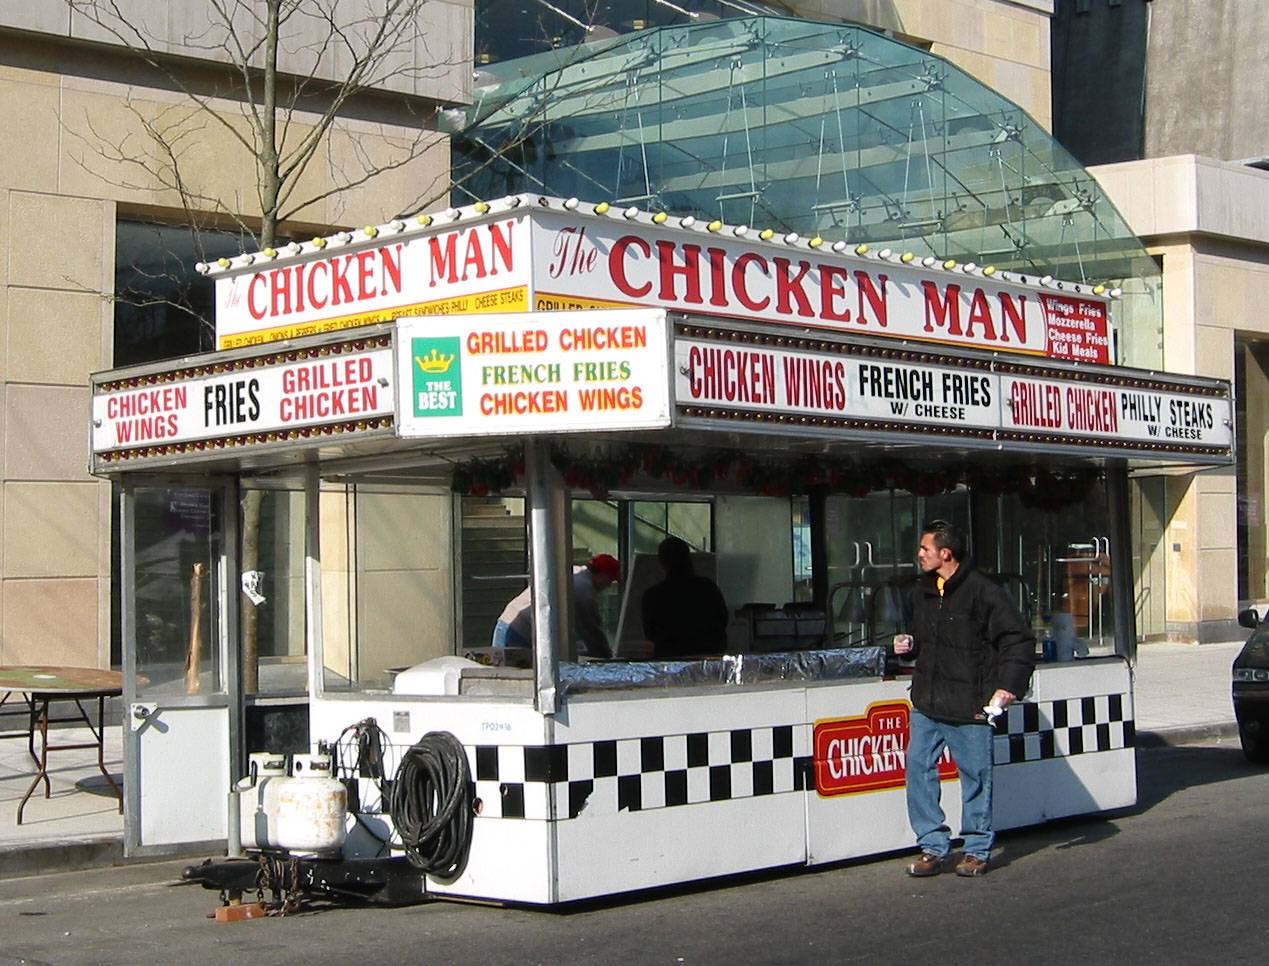 Setting Up the Spring 2003 Fair - Chicken Man at LaGuardia Place